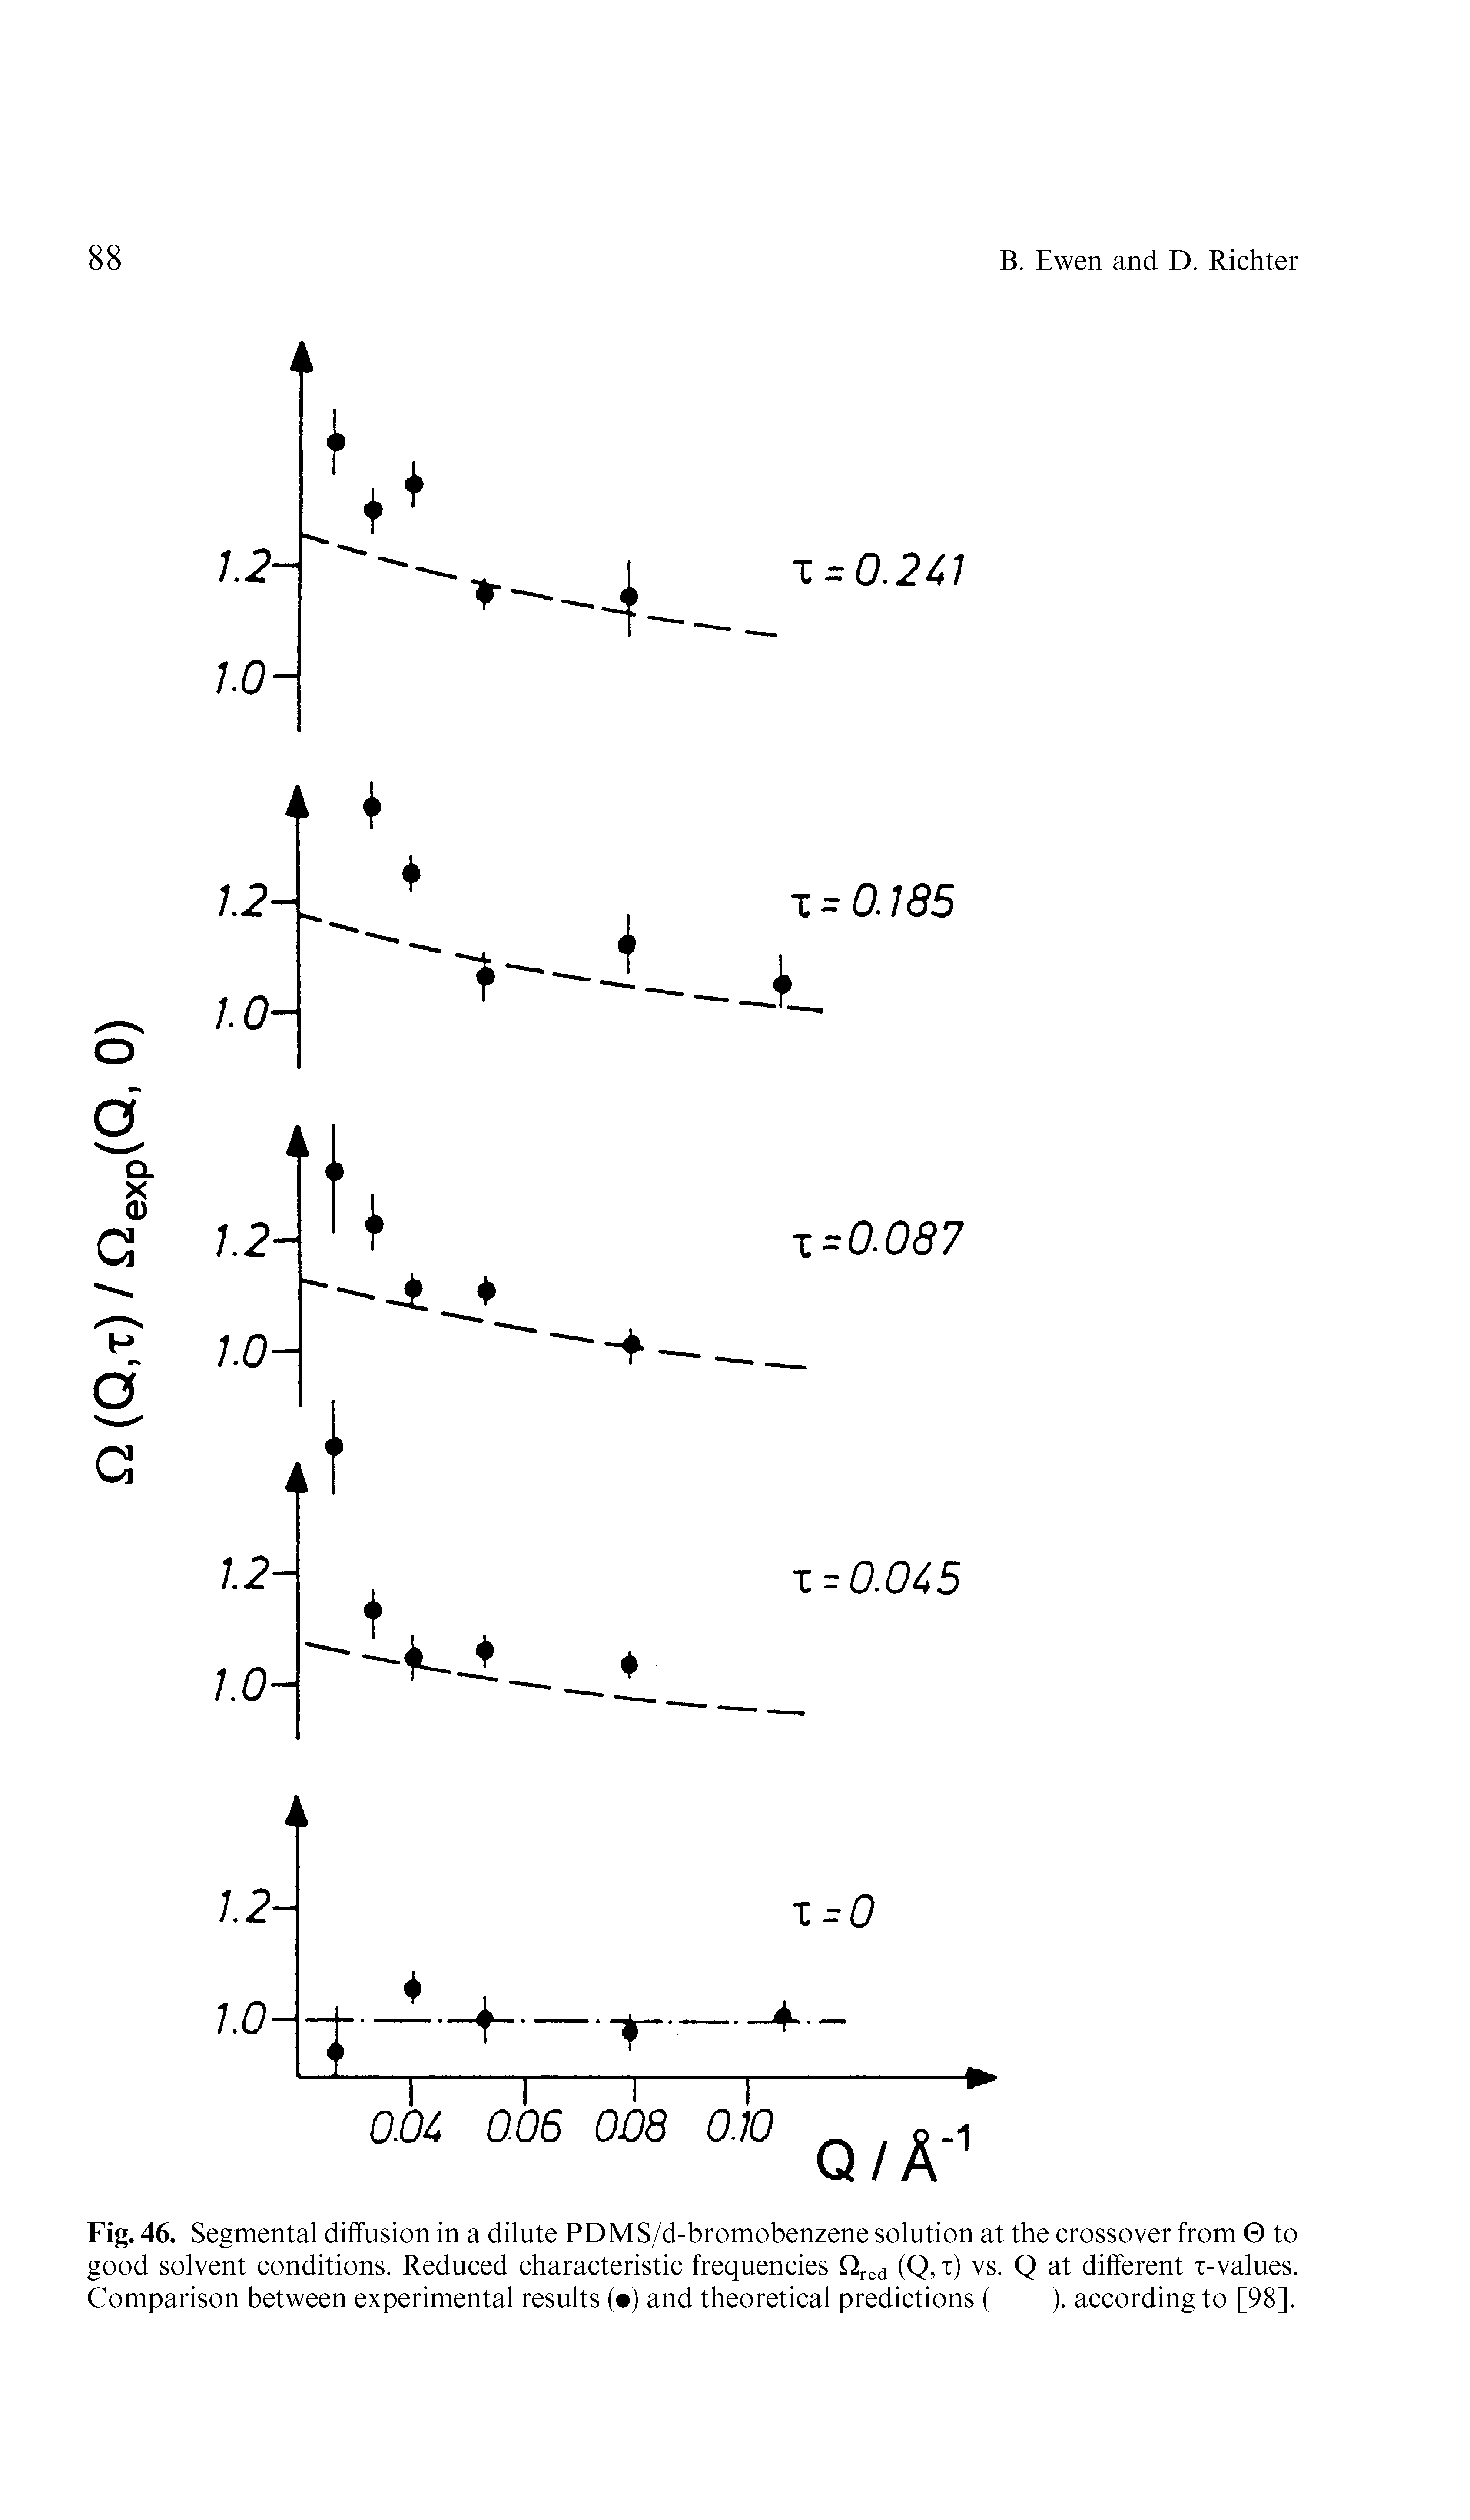 Fig. 46. Segmental diffusion in a dilute PDMS/d-bromobenzene solution at the crossover from to good solvent conditions. Reduced characteristic frequencies Qred (Q, x) vs. Q at different x-values. Comparison between experimental results ( ) and theoretical predictions (-). according to [98].